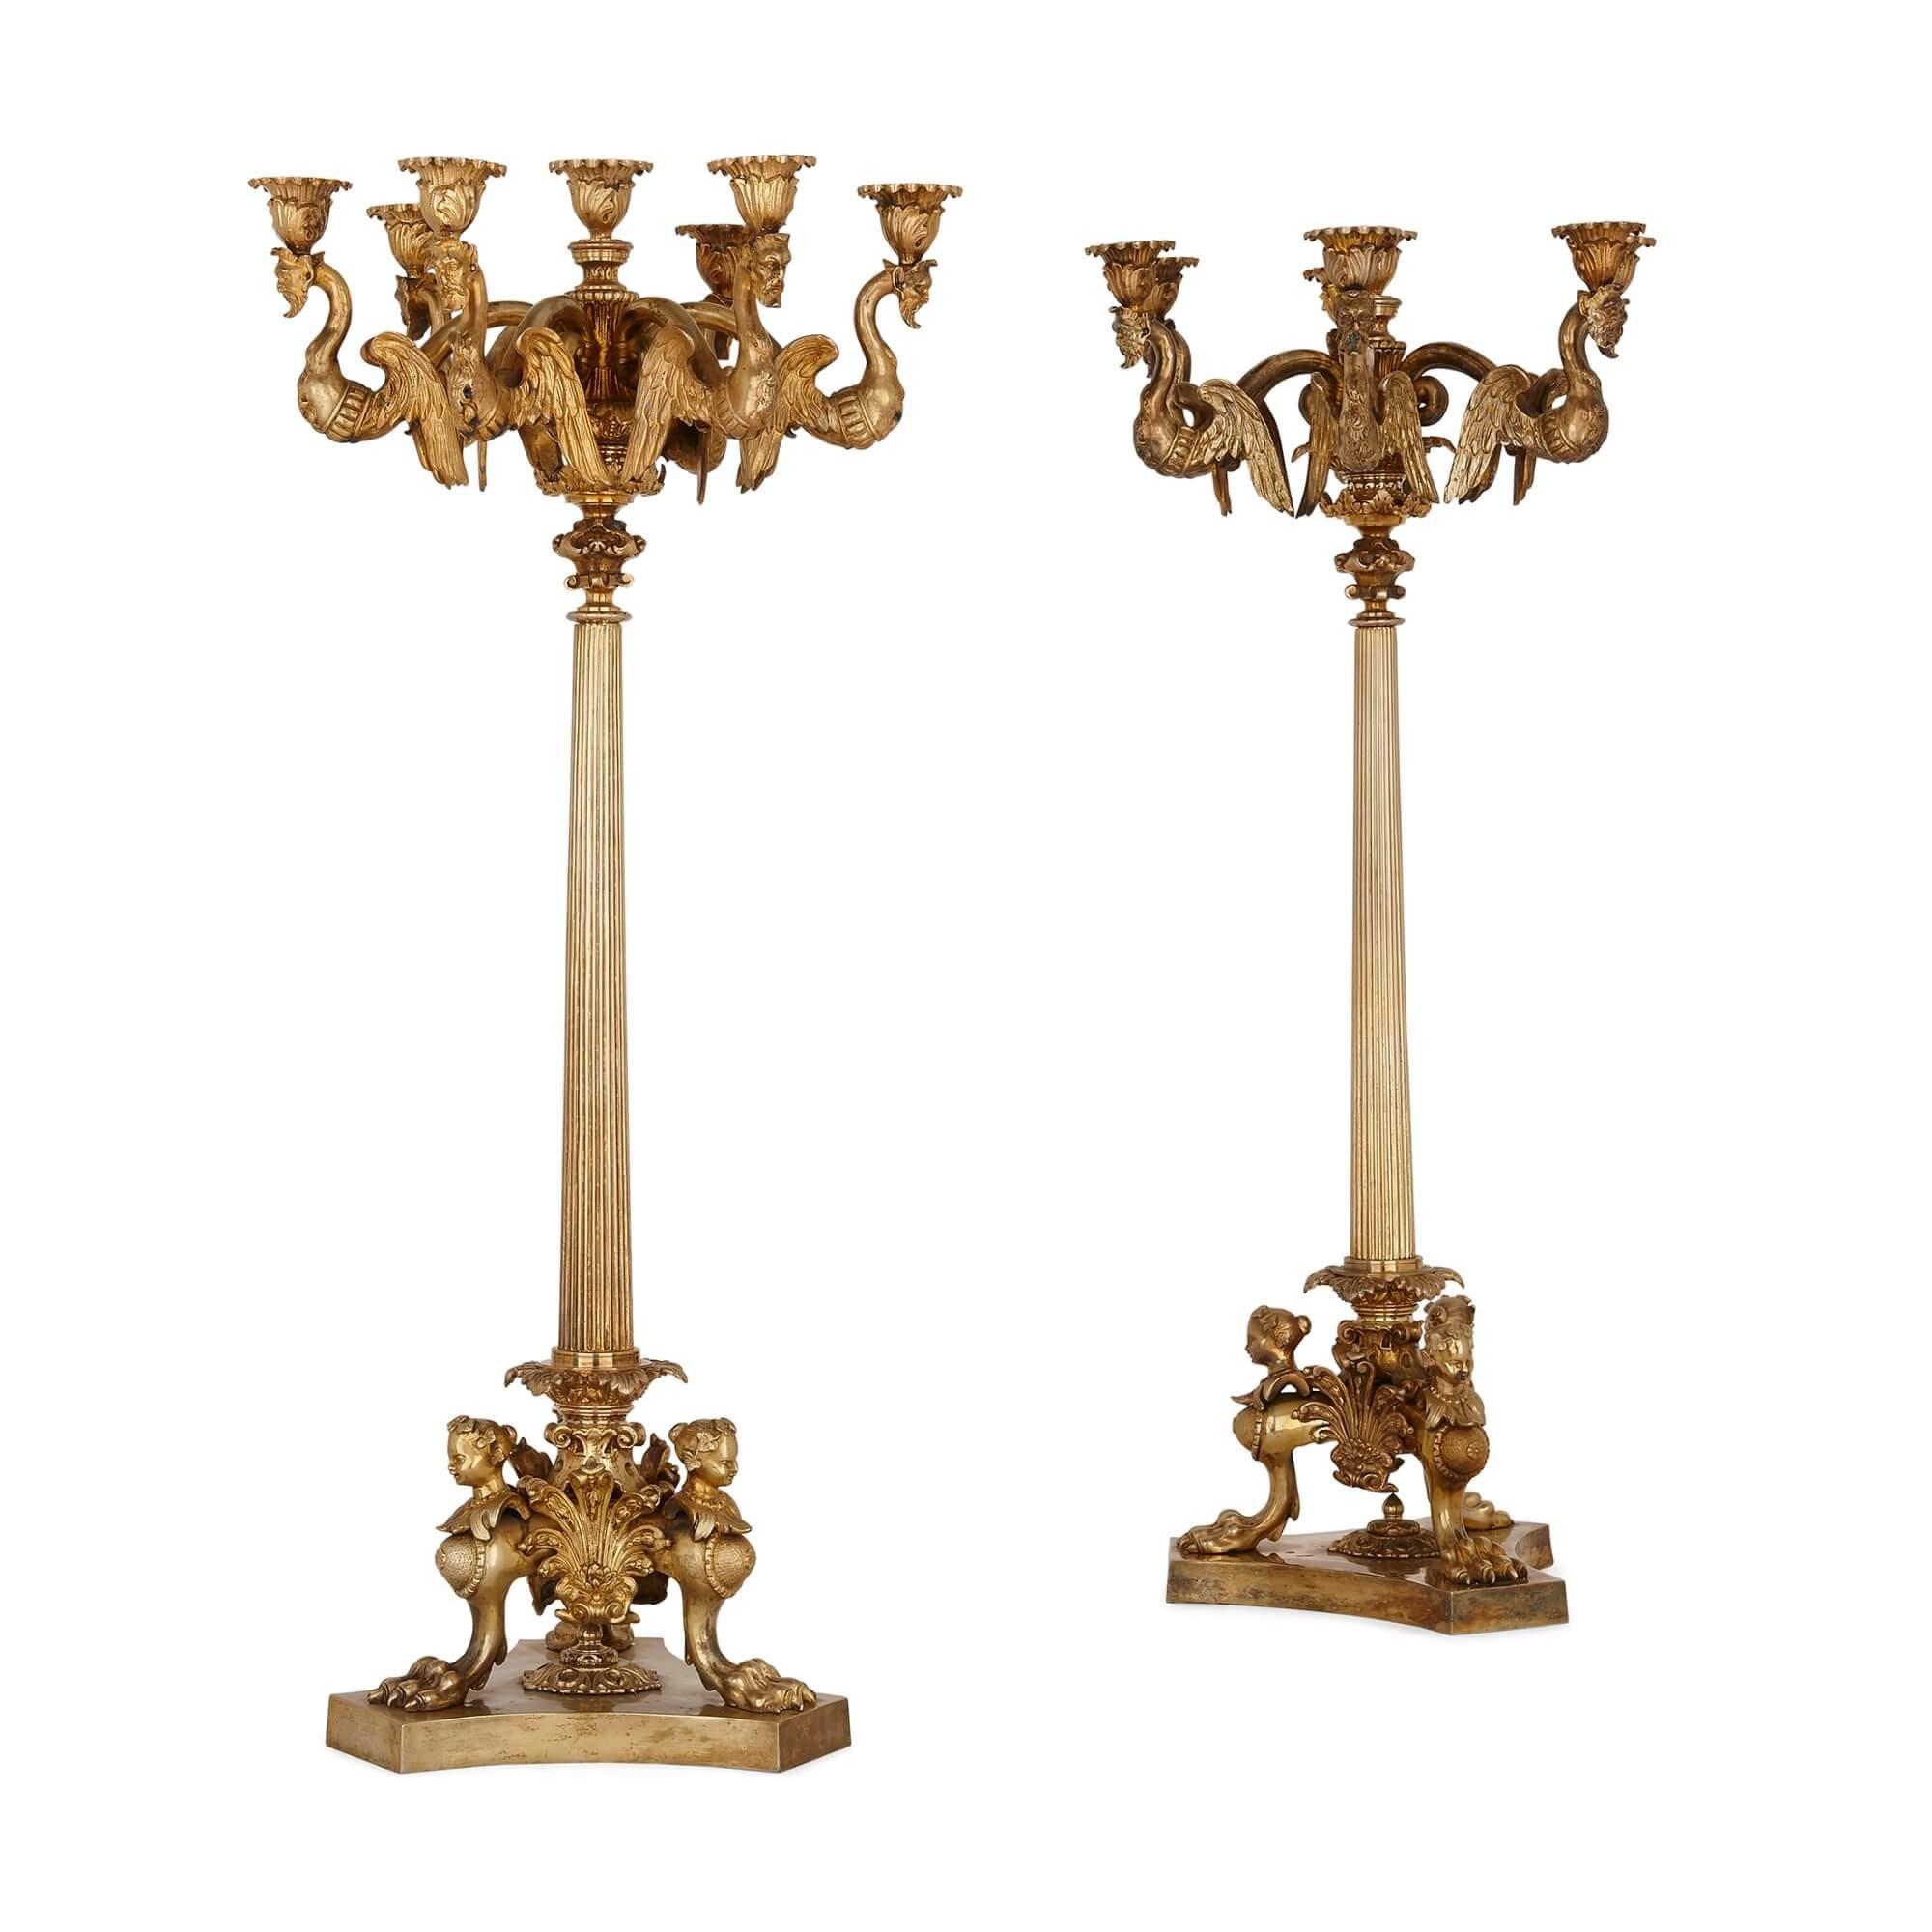 Pair of French gilt bronze table candelabra
French, 19th Century
Height 75cm, diameter 35cm

The fine gilt bronze candelabra in this pair are crafted in the eclectic style that prevailed during the reign of Napoleon III. The candelabra display hints